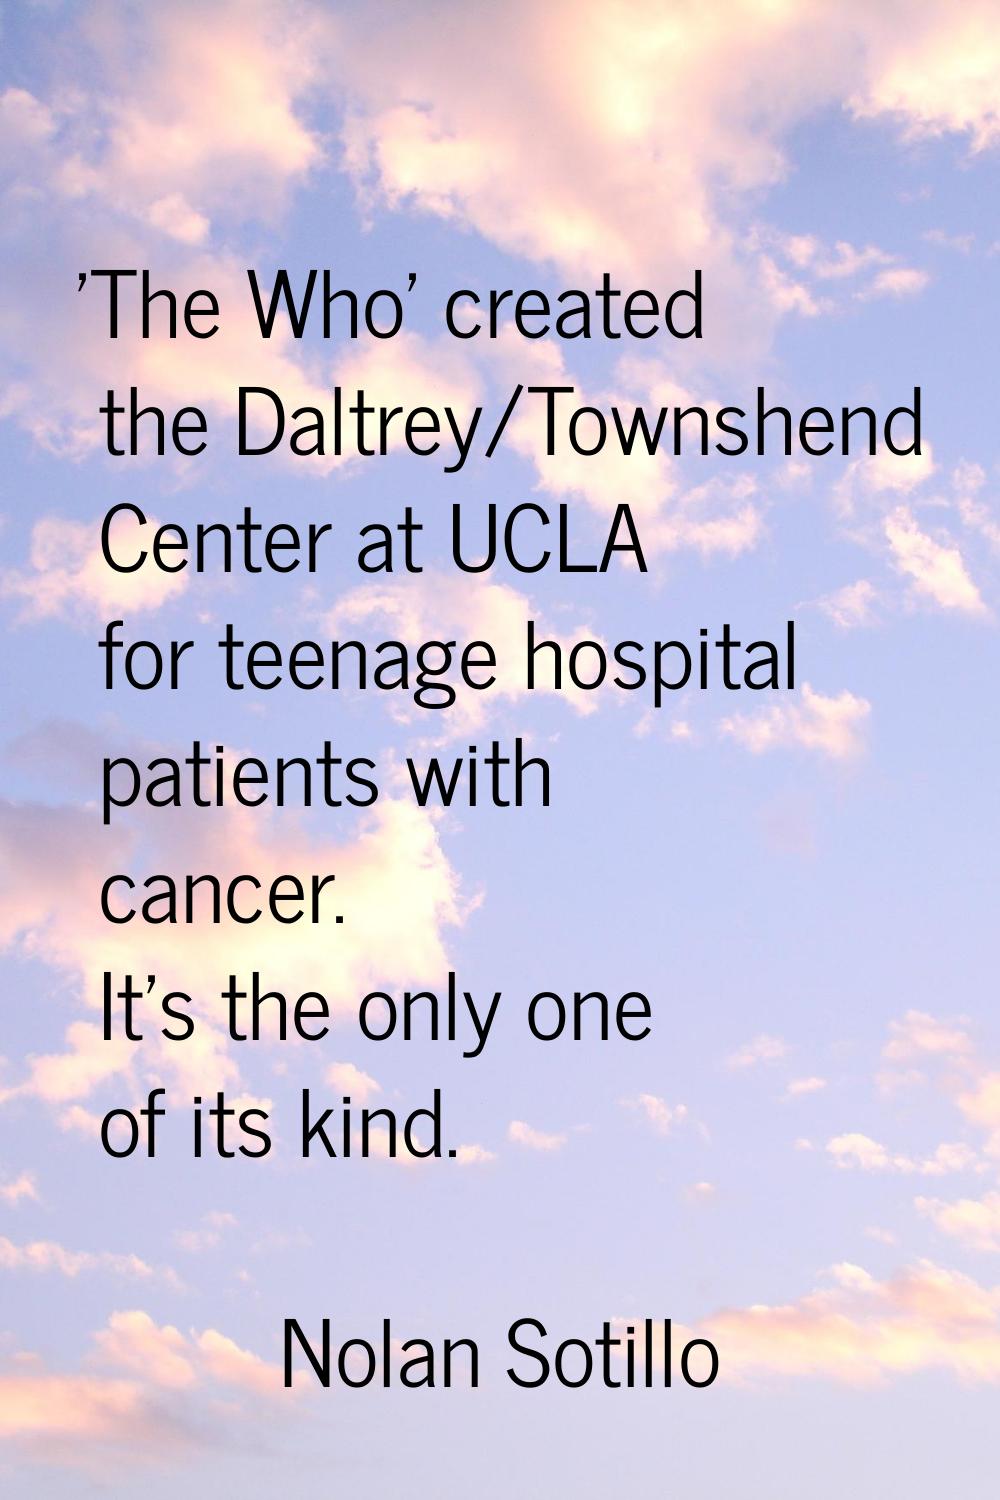 'The Who' created the Daltrey/Townshend Center at UCLA for teenage hospital patients with cancer. I